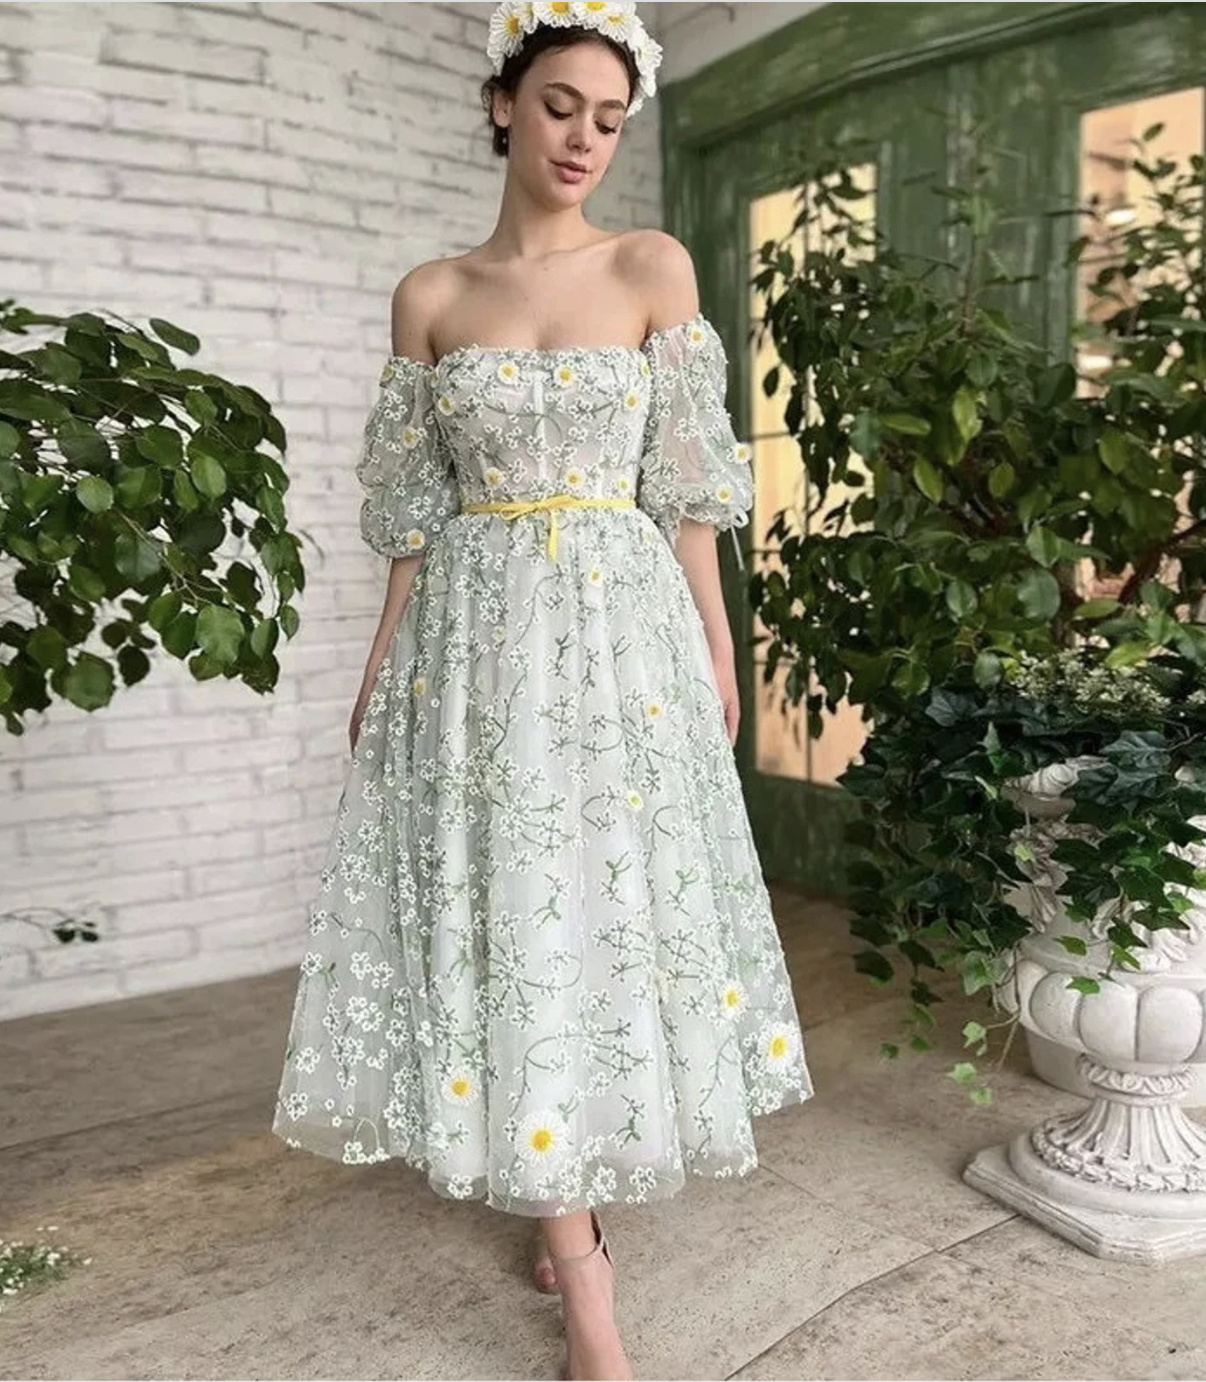 Daisy Chain Flower Embroidery Neck Dress 